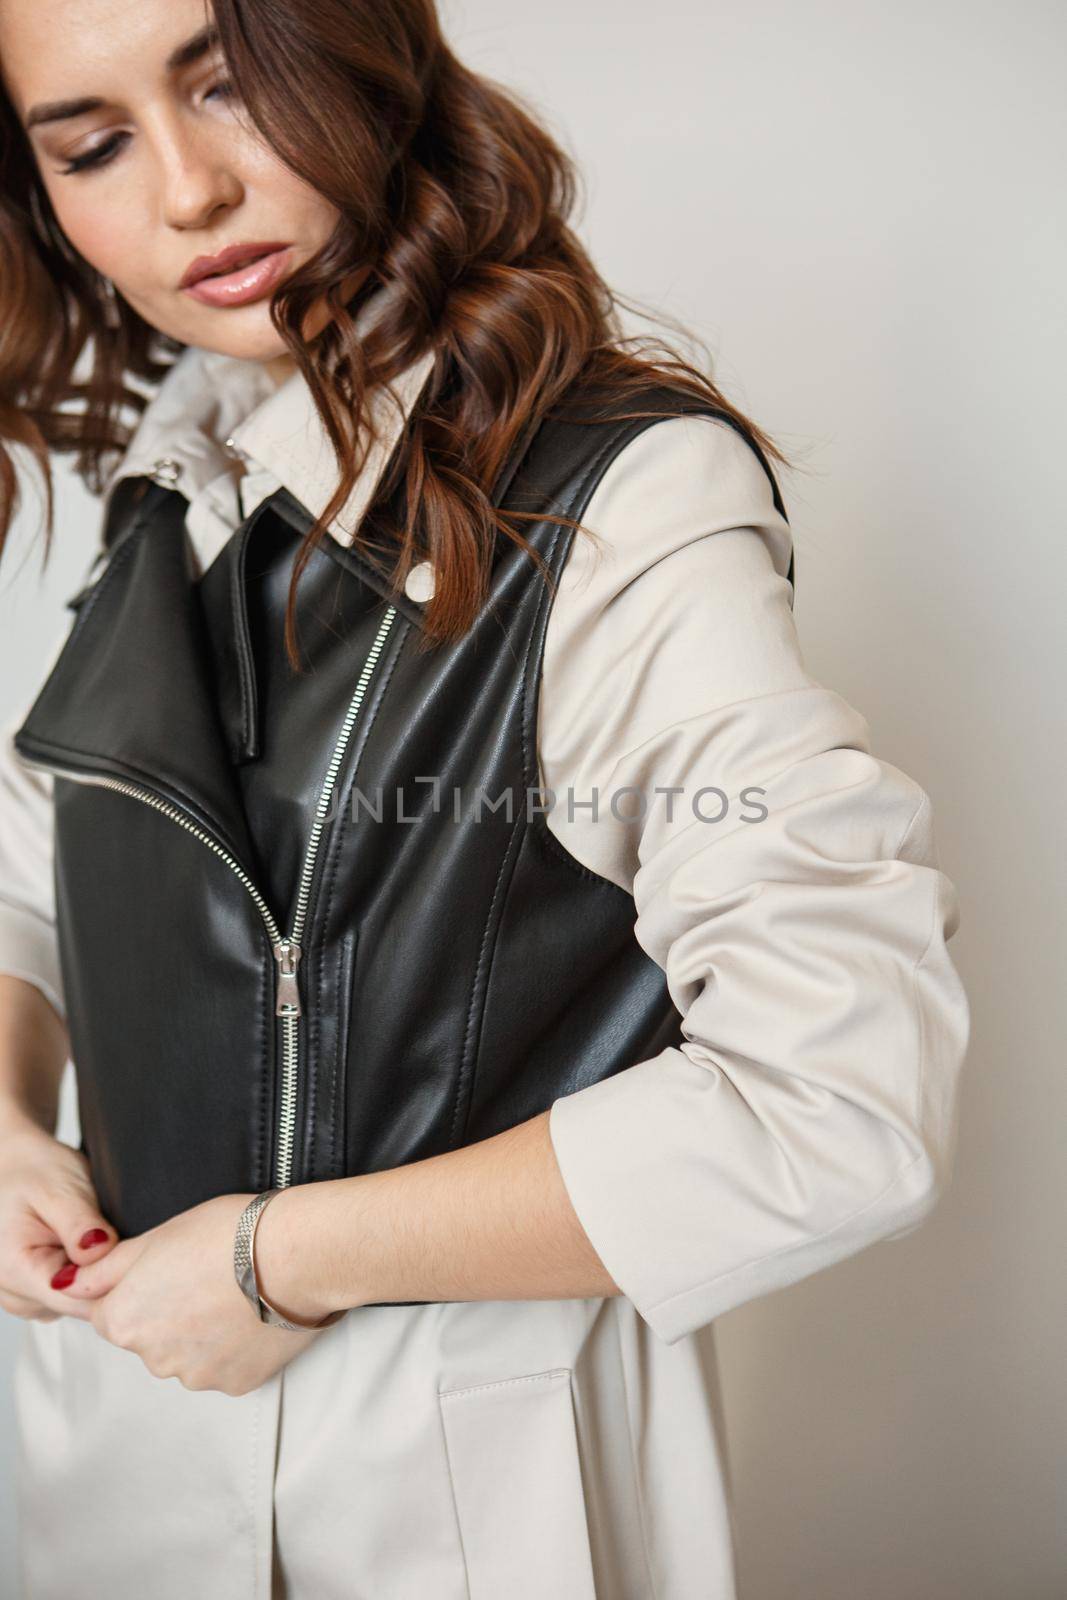 A model girl stands on a studio background, advertising clothes. A girl in a beige suit and a leather jacket by deandy